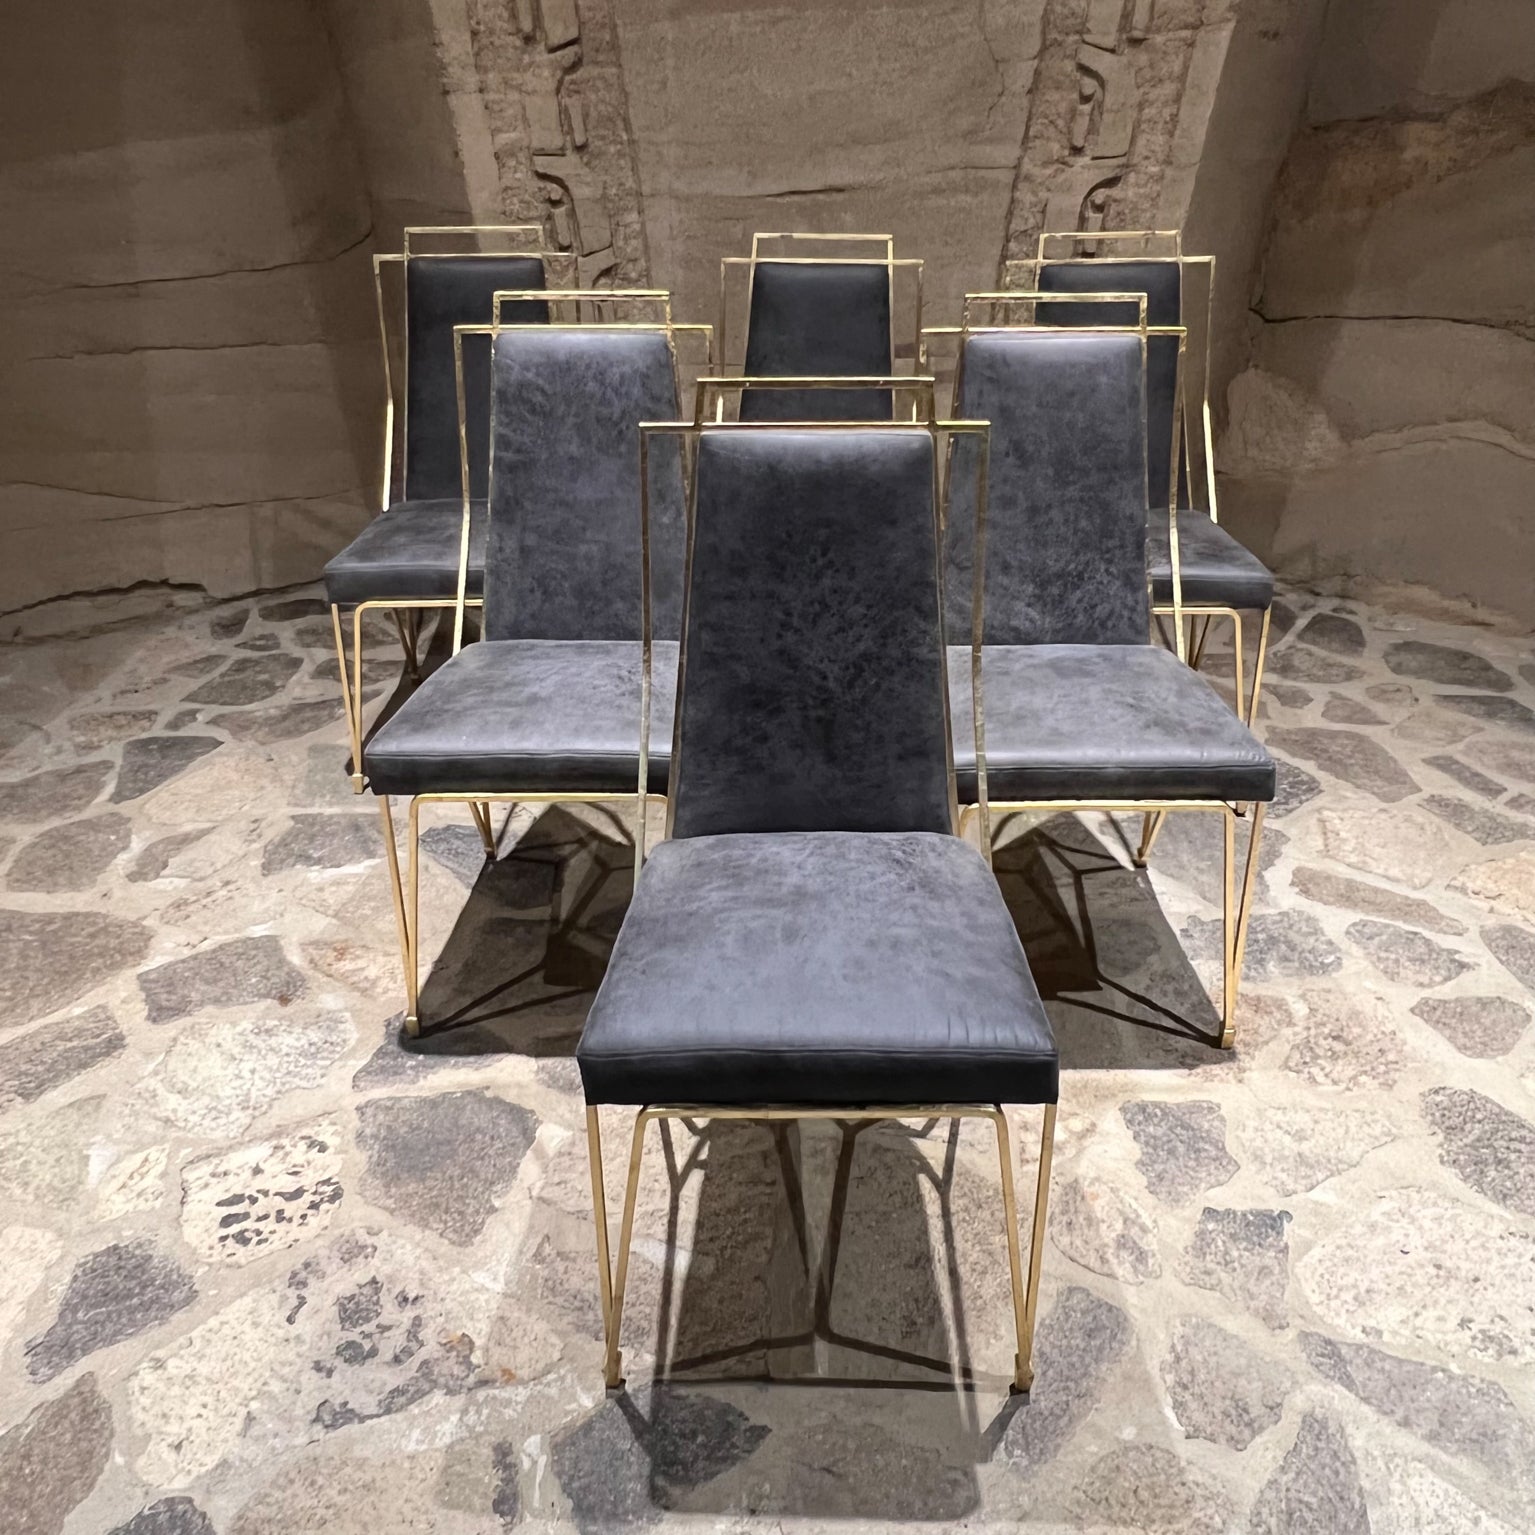 1950s Arturo Pani Mexican Modernism Exquisite set of six gold leaf dining chairs in rich gray, Mexico City 
Unmarked. 
Measures: 36 tall x 22.75 depth x 17.5 width Seat 18.5 height
Original vintage very good preowned condition. New